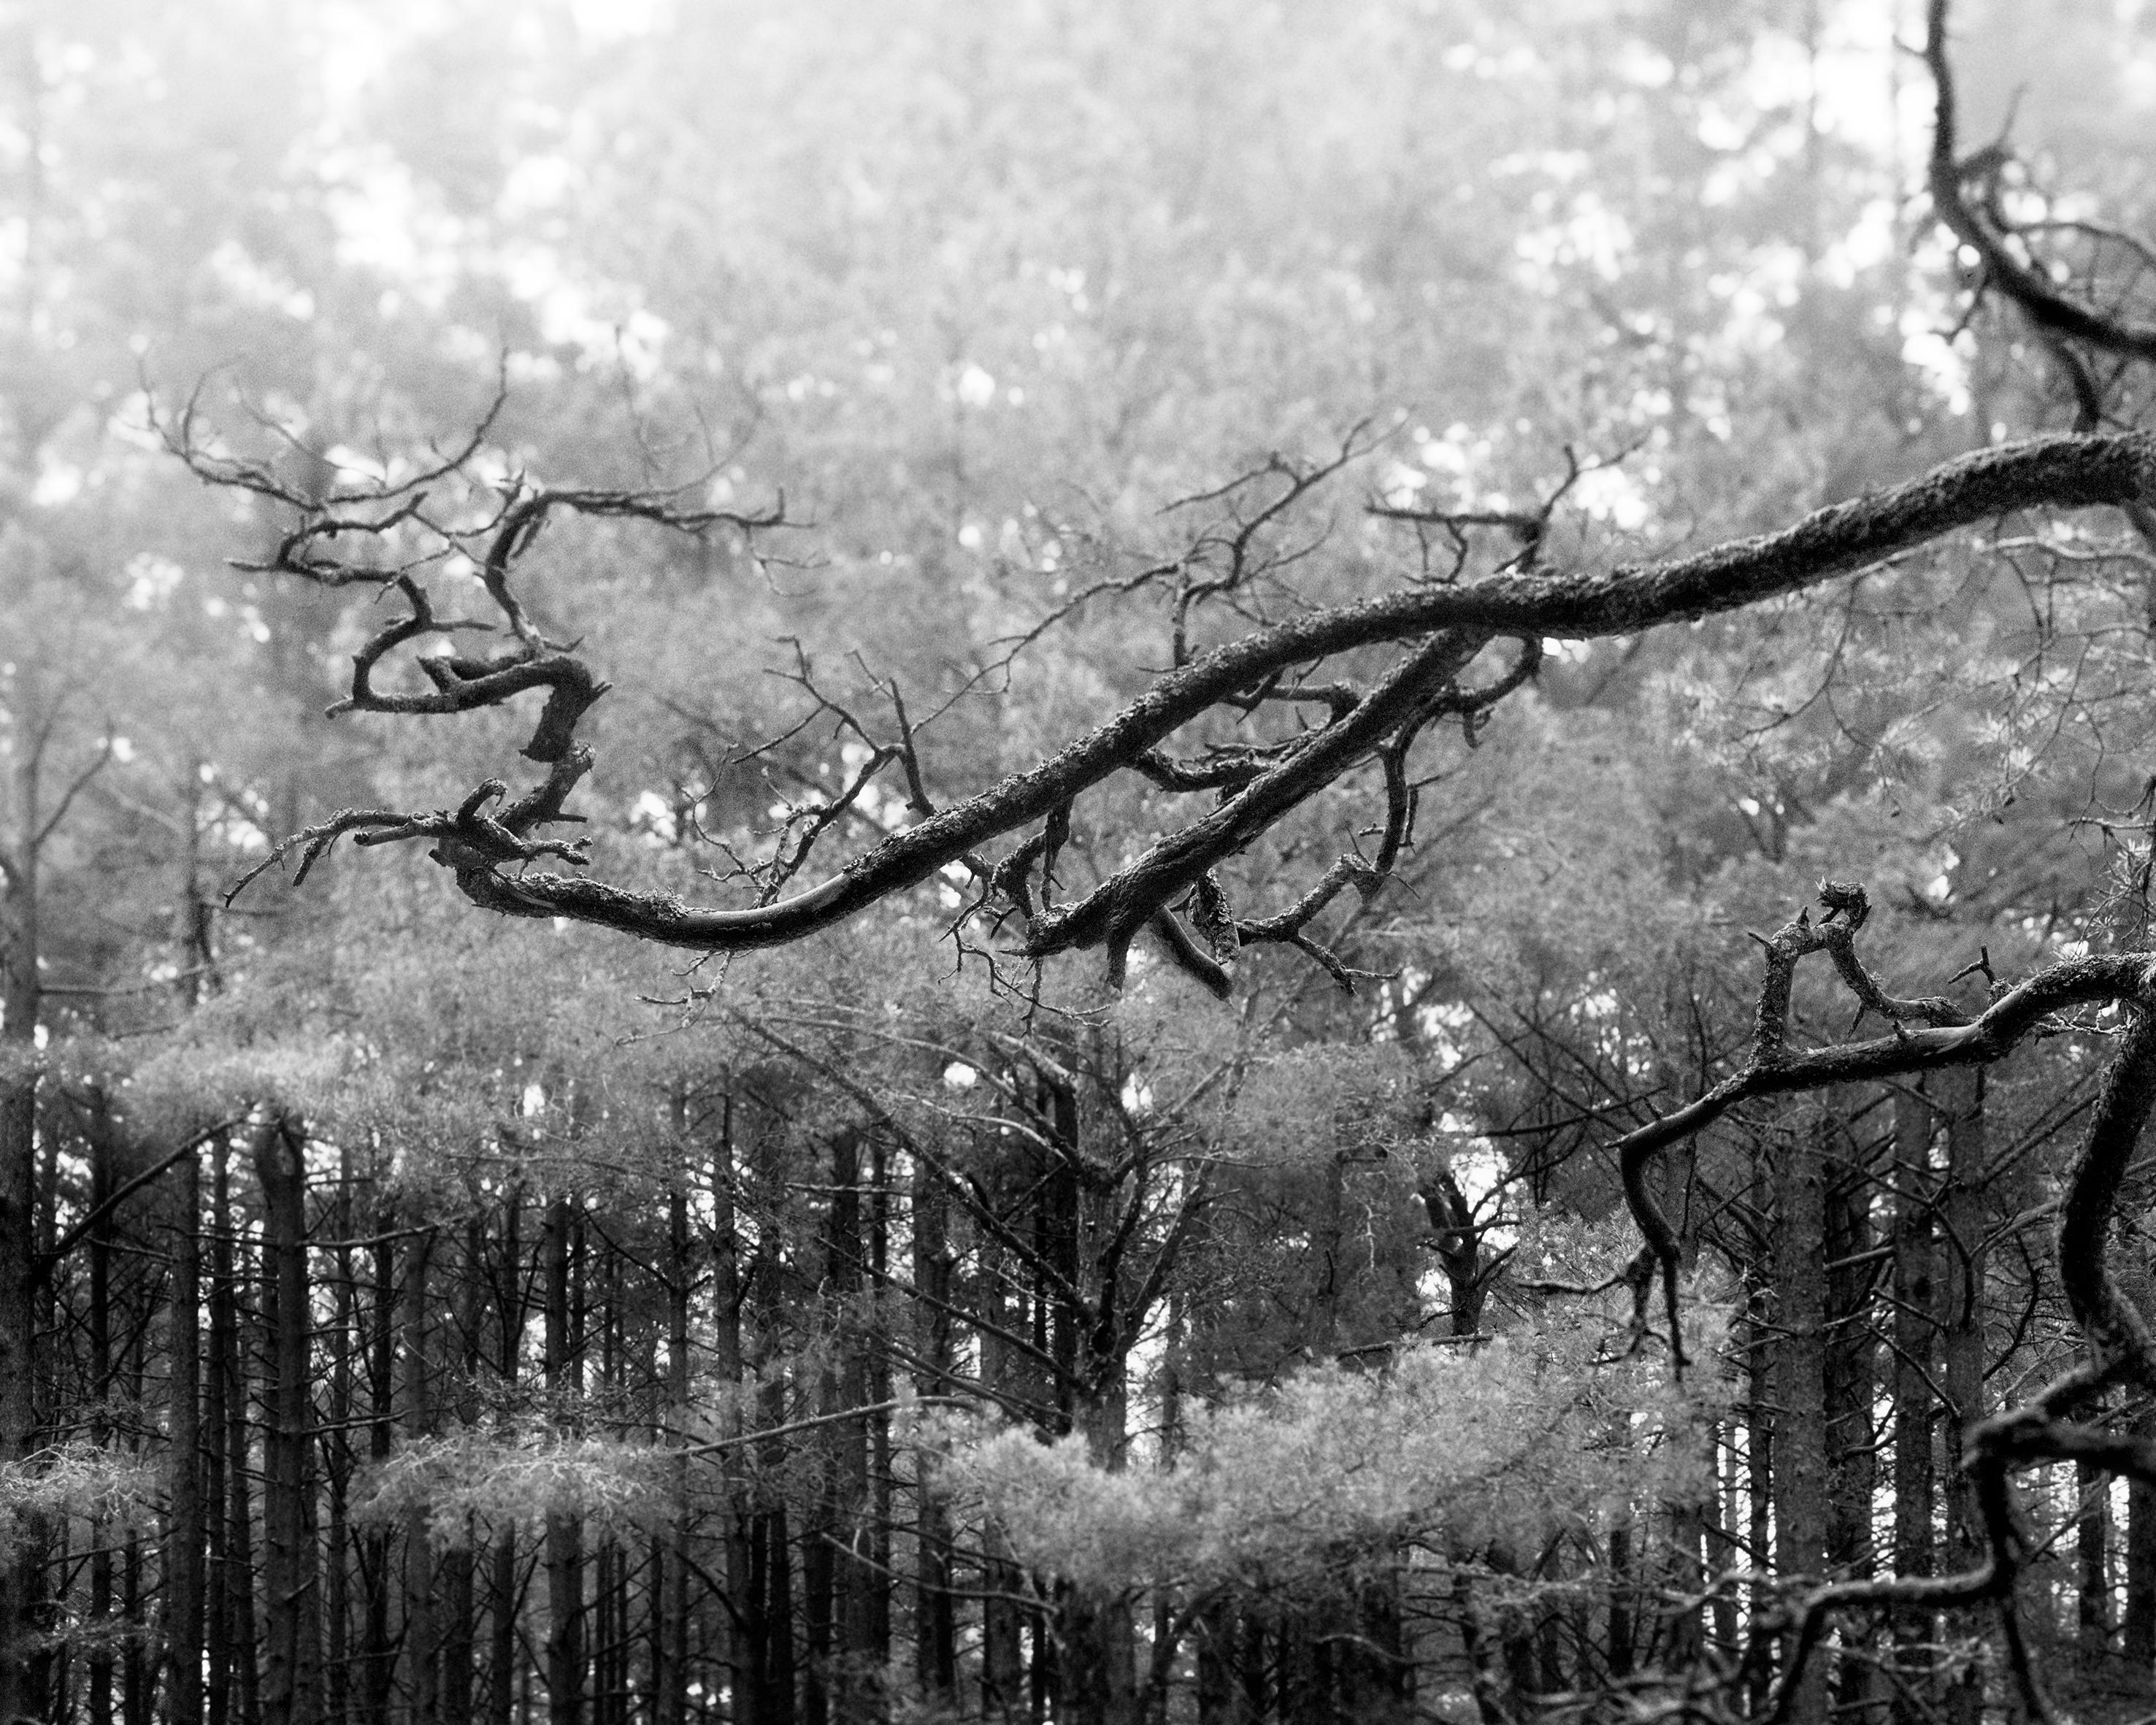 Ugne Pouwell Black and White Photograph - Baltic pine - analogue black and white forest photography, Limited edition of 20